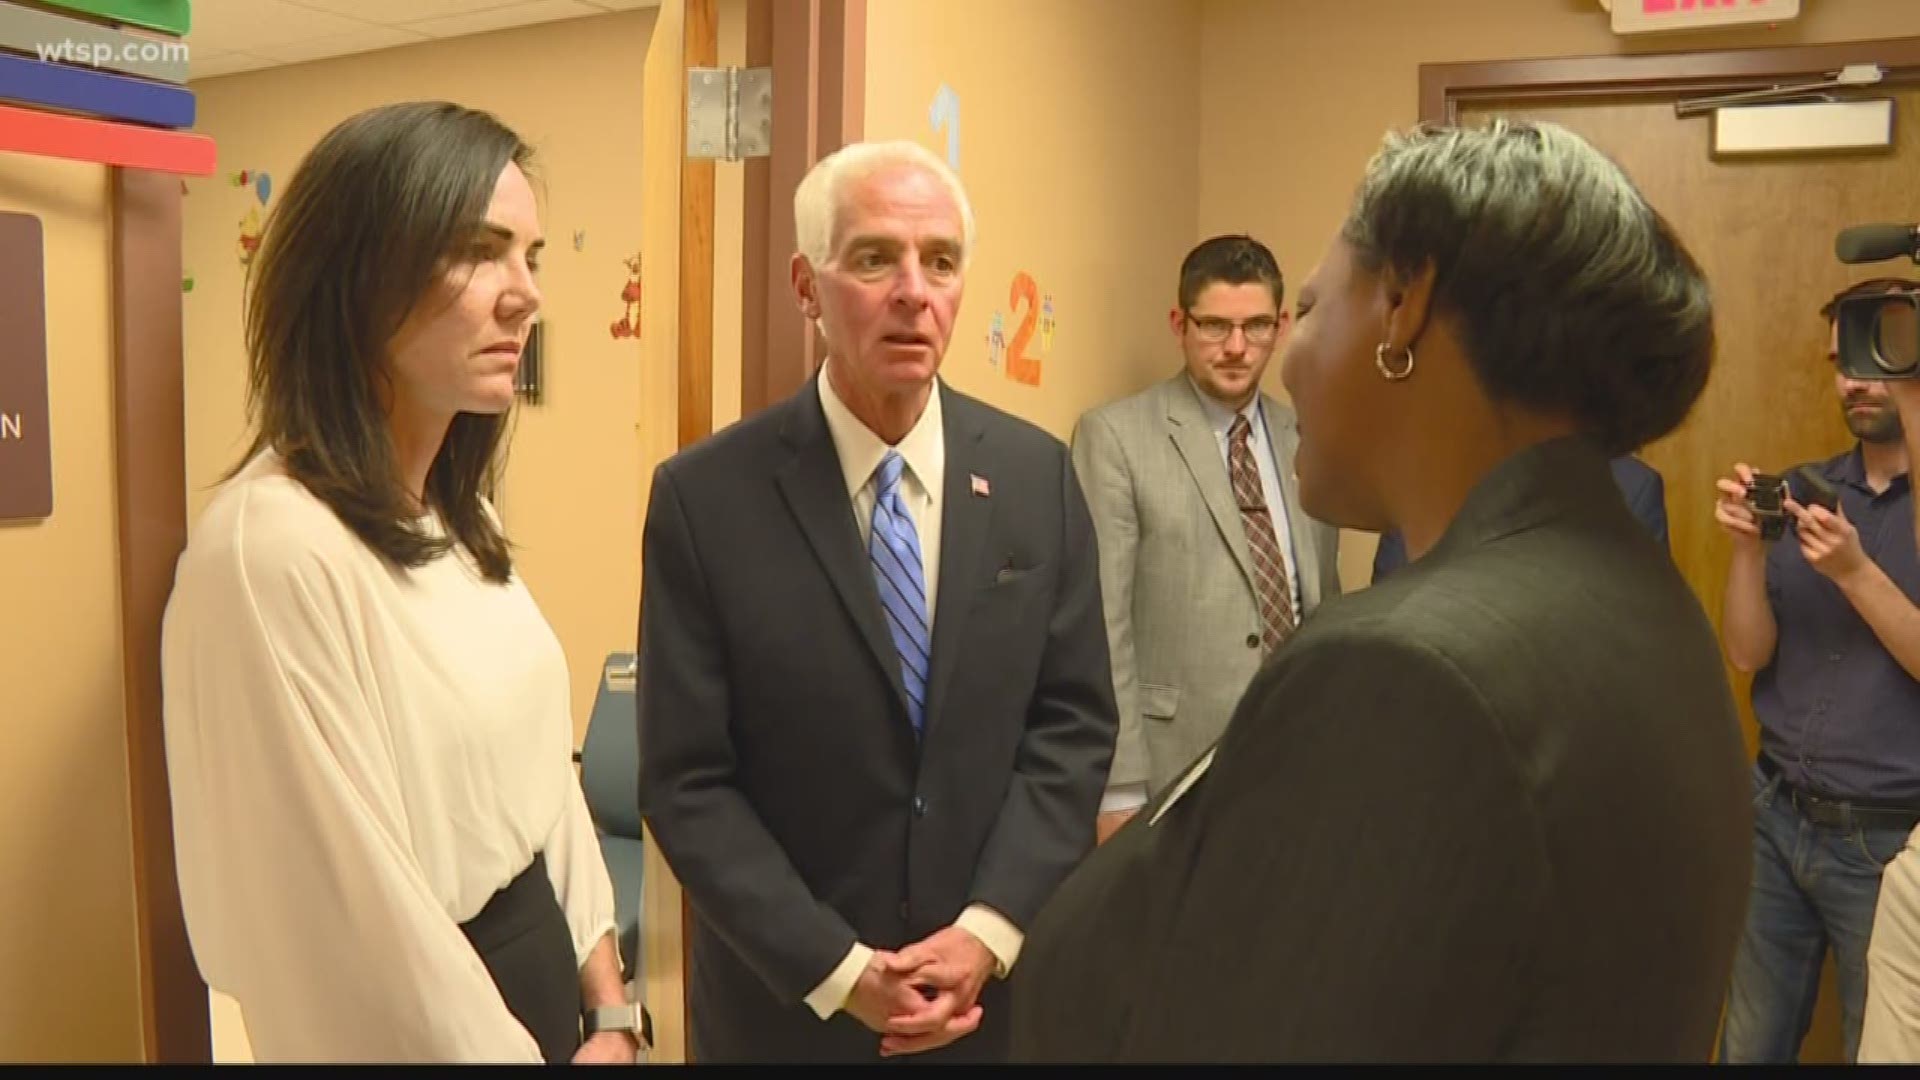 Congressman Charlie Crist is asking the Centers for Disease Control to take more action and be more transparent about coronavirus preparations.